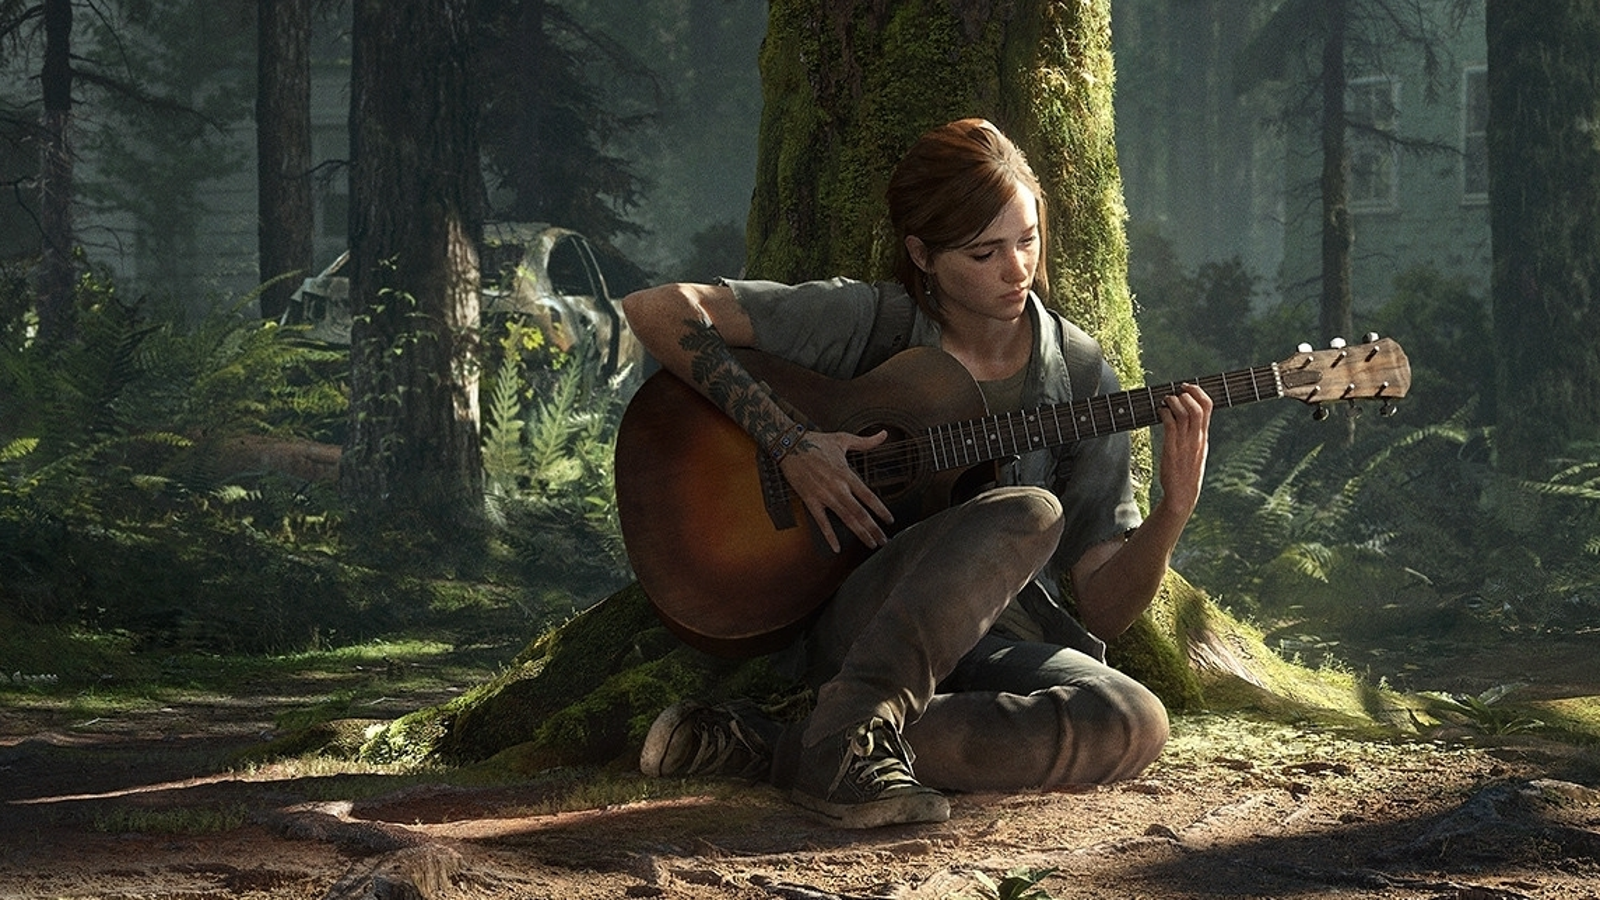 The Last Of Us Part 2' Gets A Gorgeous Free PS4 Theme - GAMINGbible